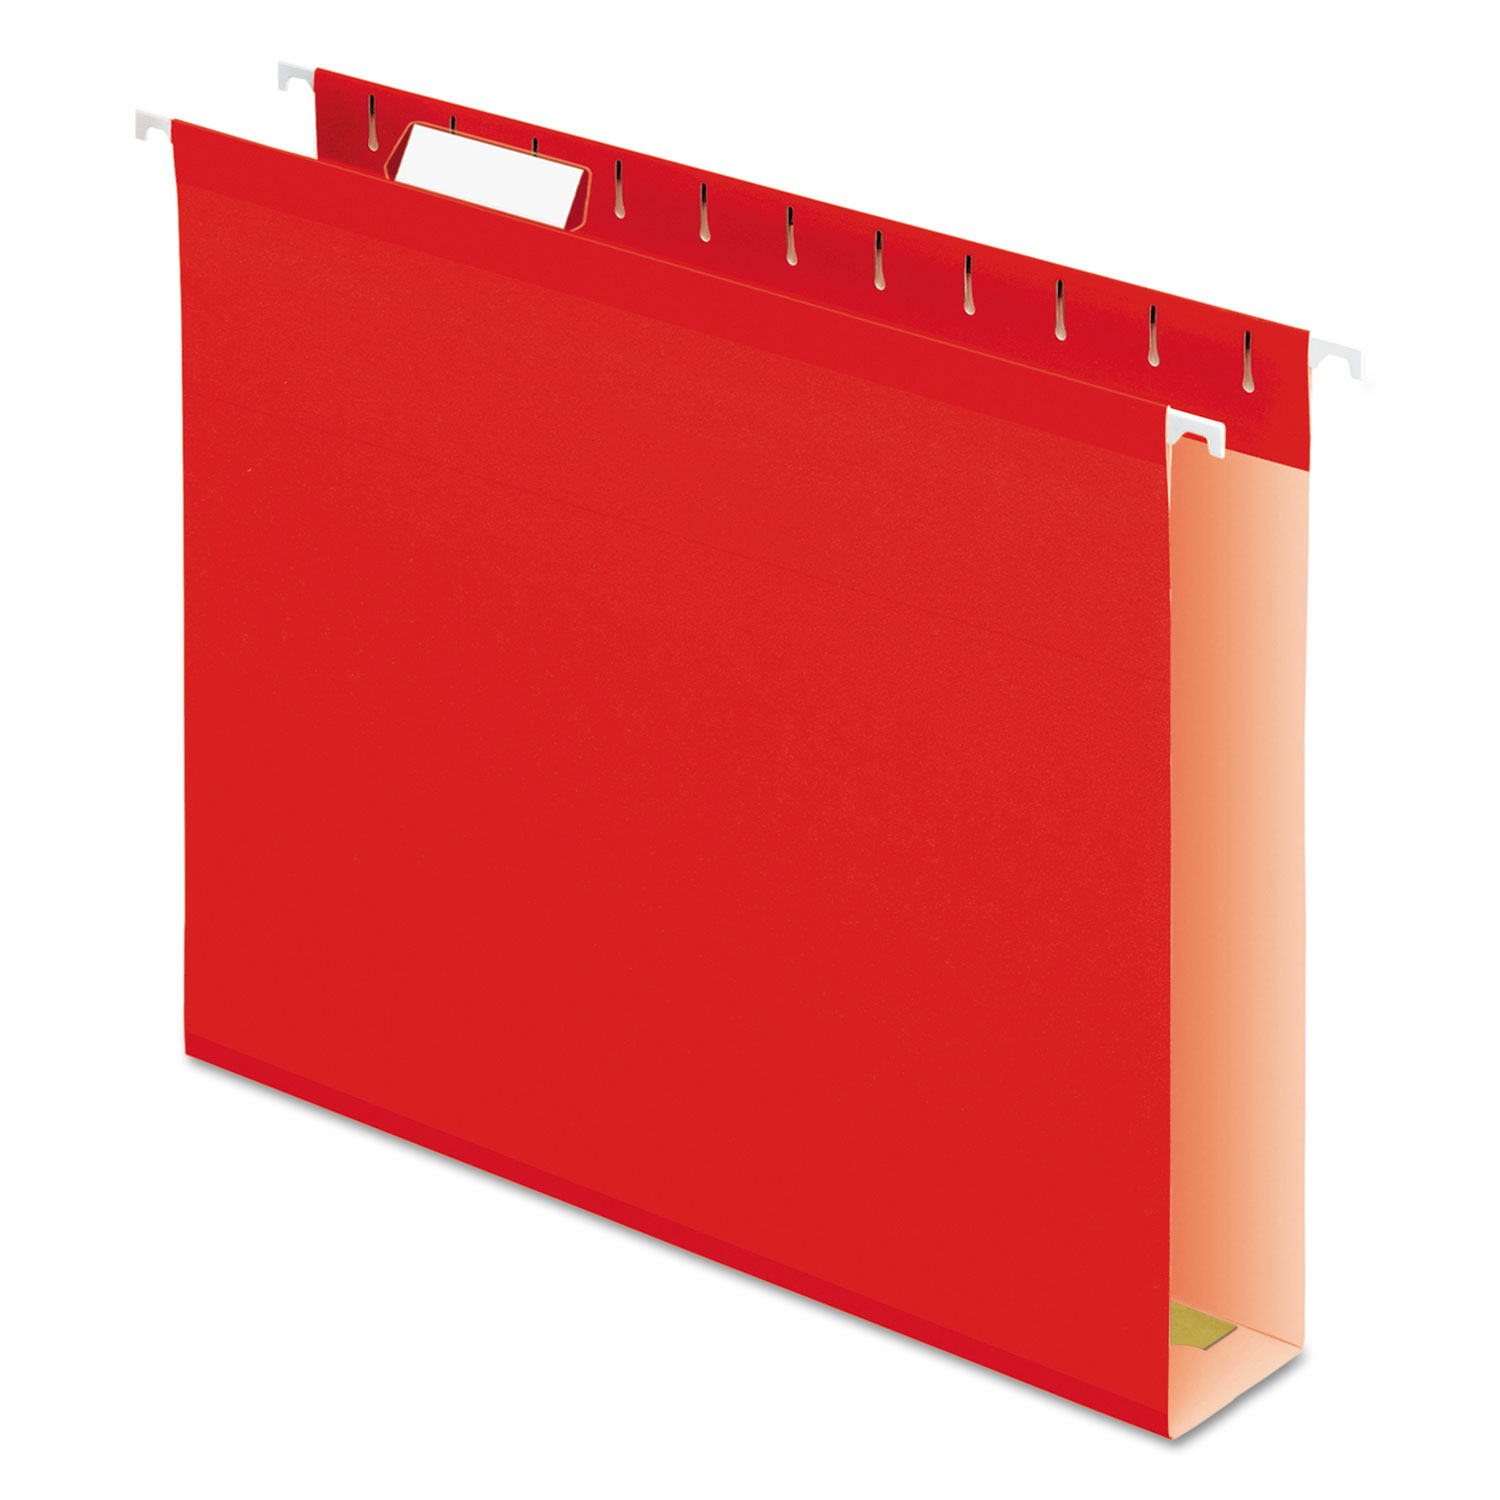  Pendaflex 04152X2 RED Extra Capacity Reinforced Hanging File Folders with Box Bottom, Letter Size, 1/5-Cut Tab, Red, 25/Box (PFX4152X2RED) 